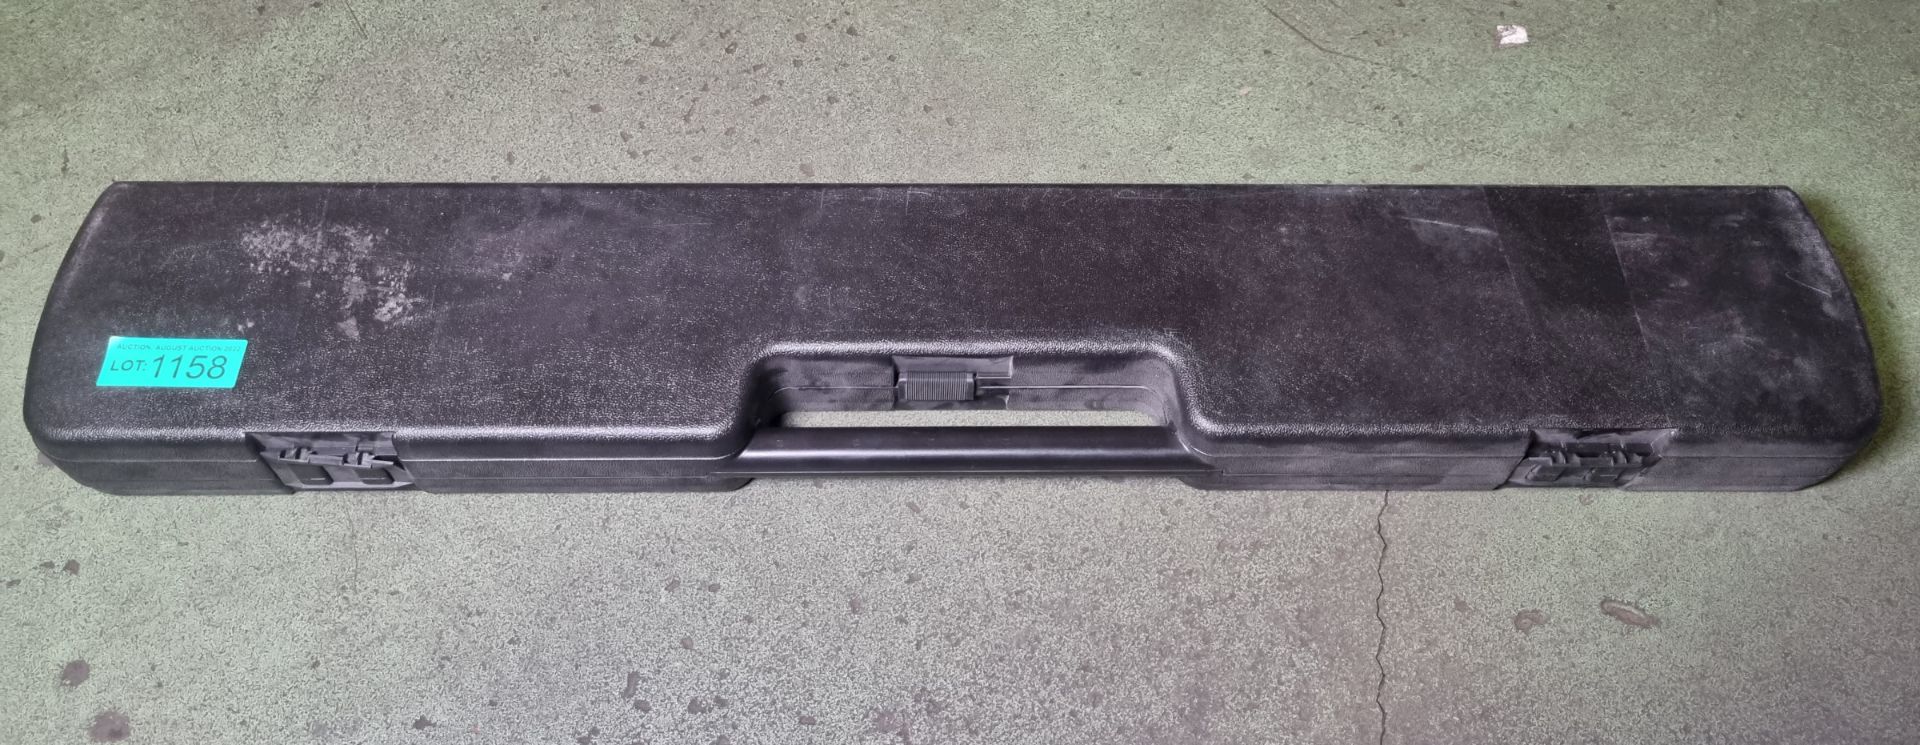 Norbar Torque wrench model 4R in carry case - Image 4 of 4